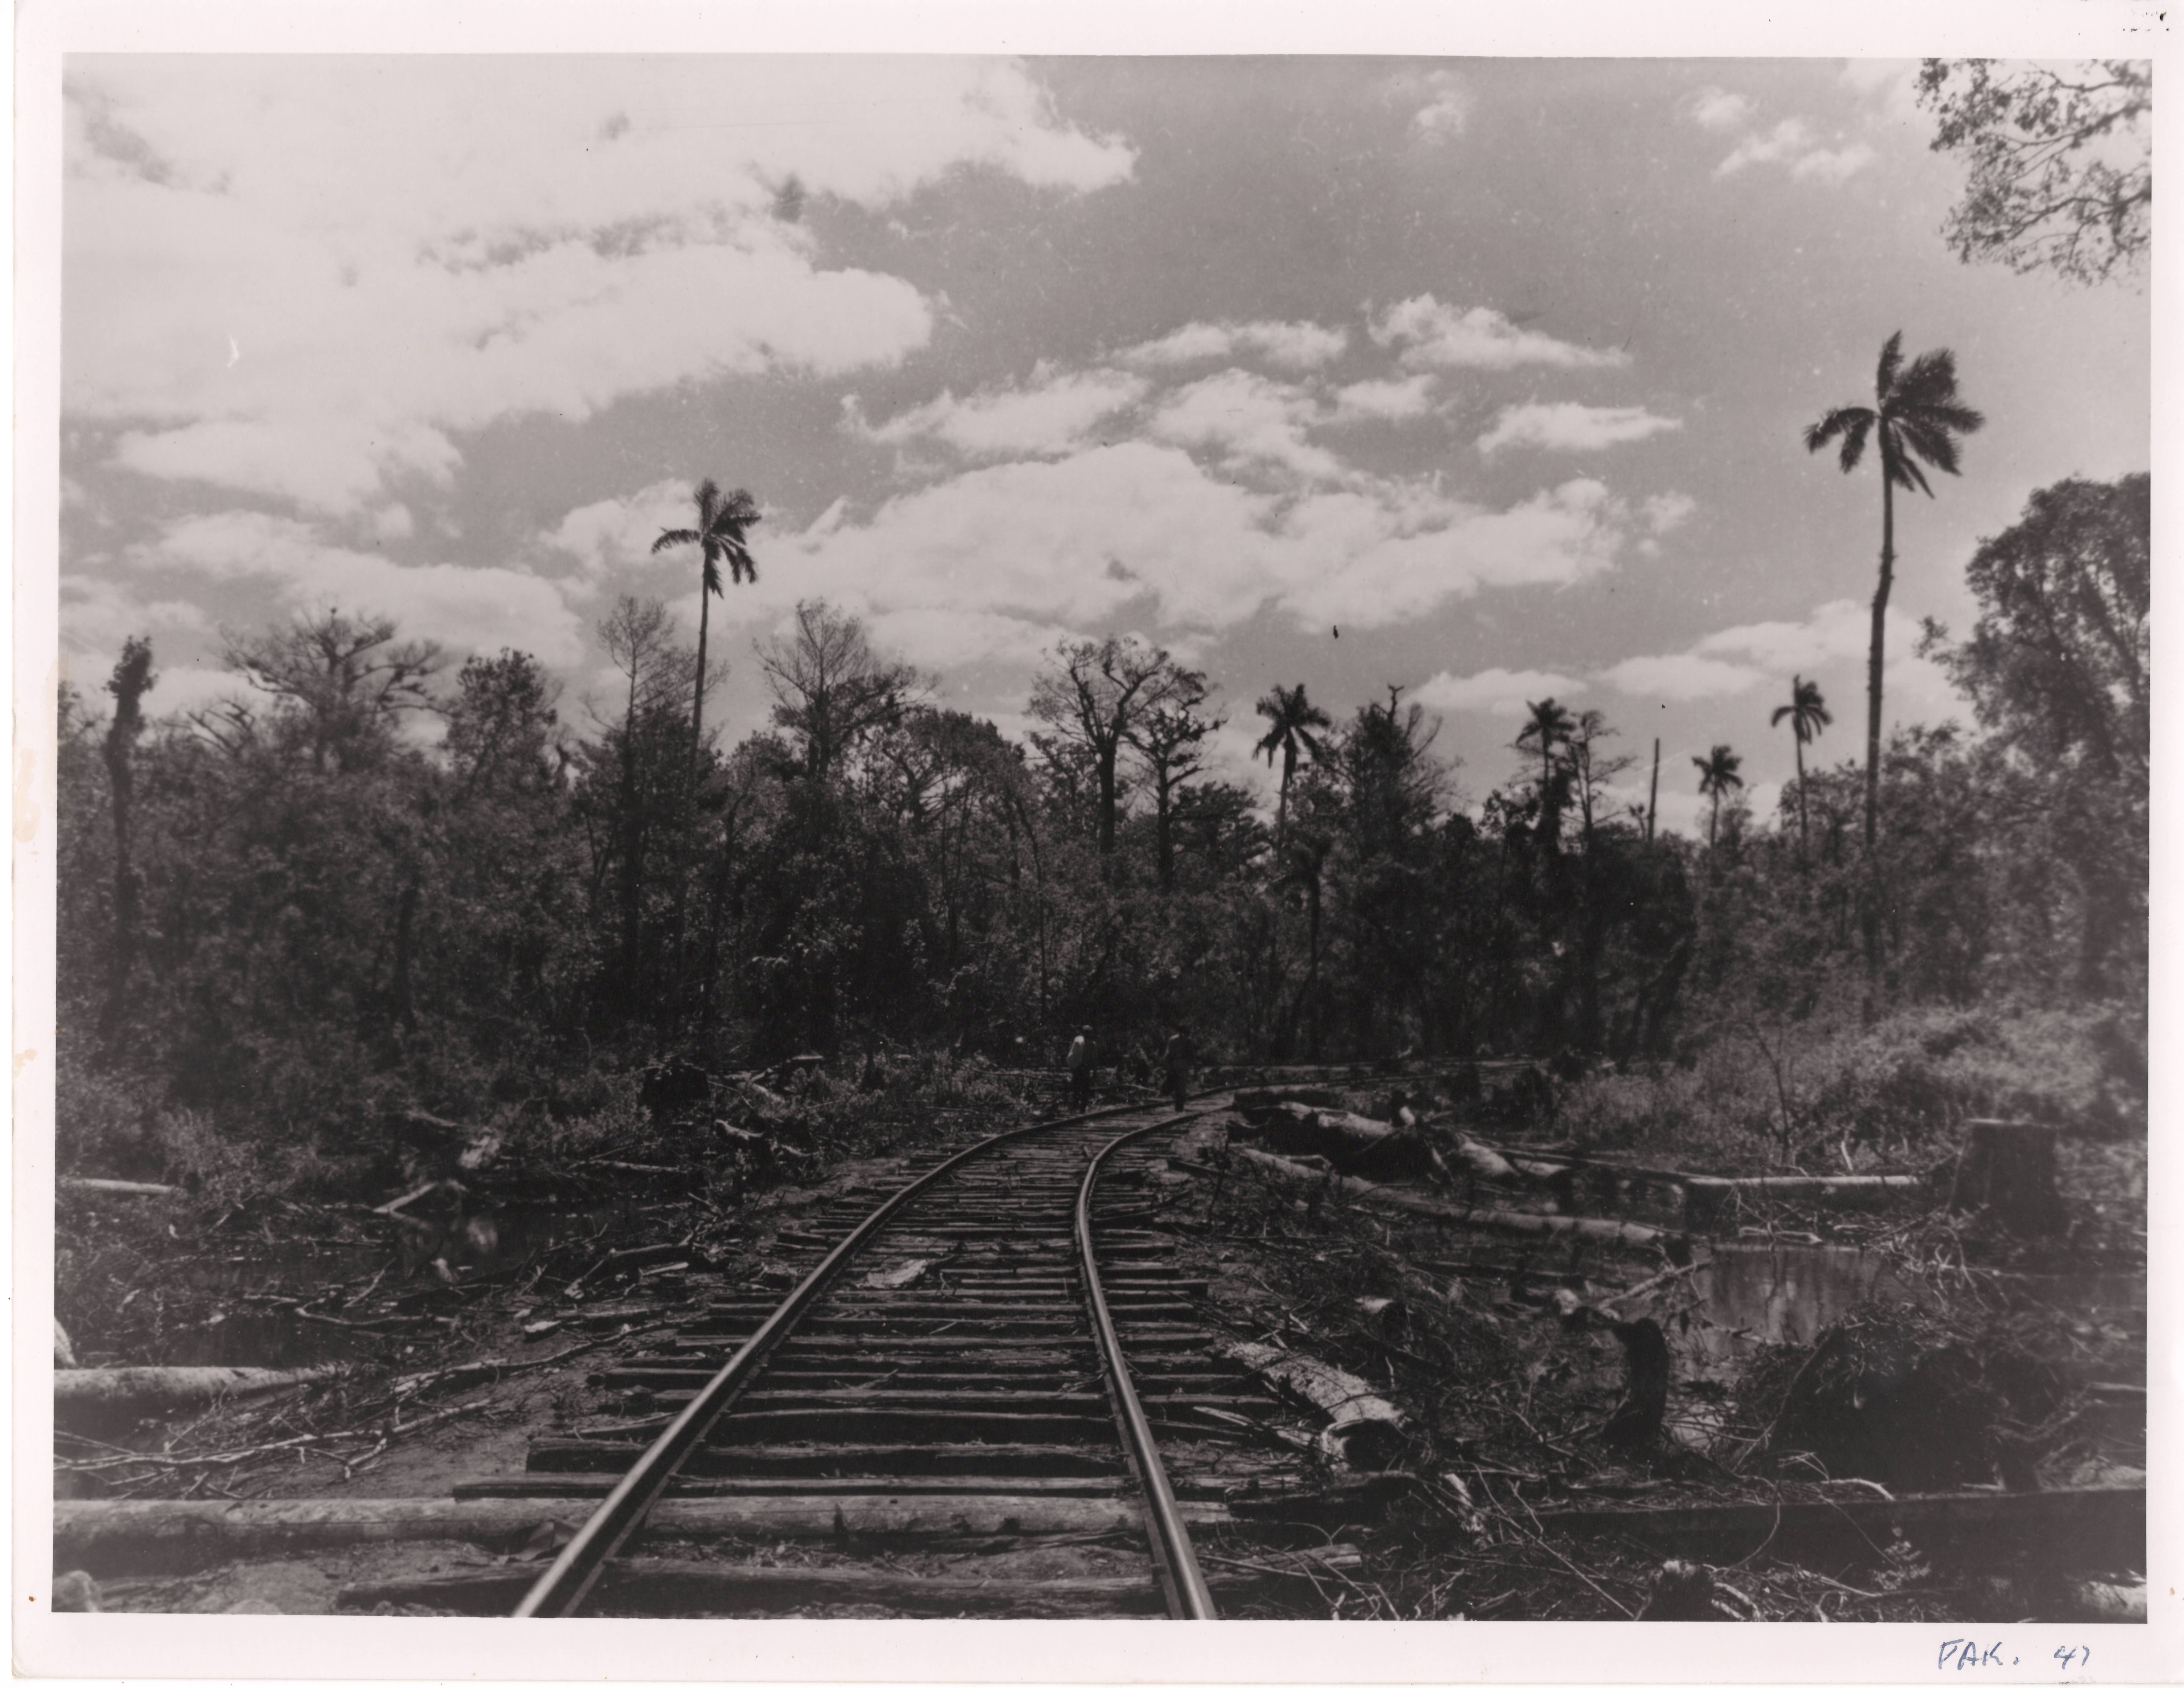 Railroad bed to transport timber, historic image in black and white